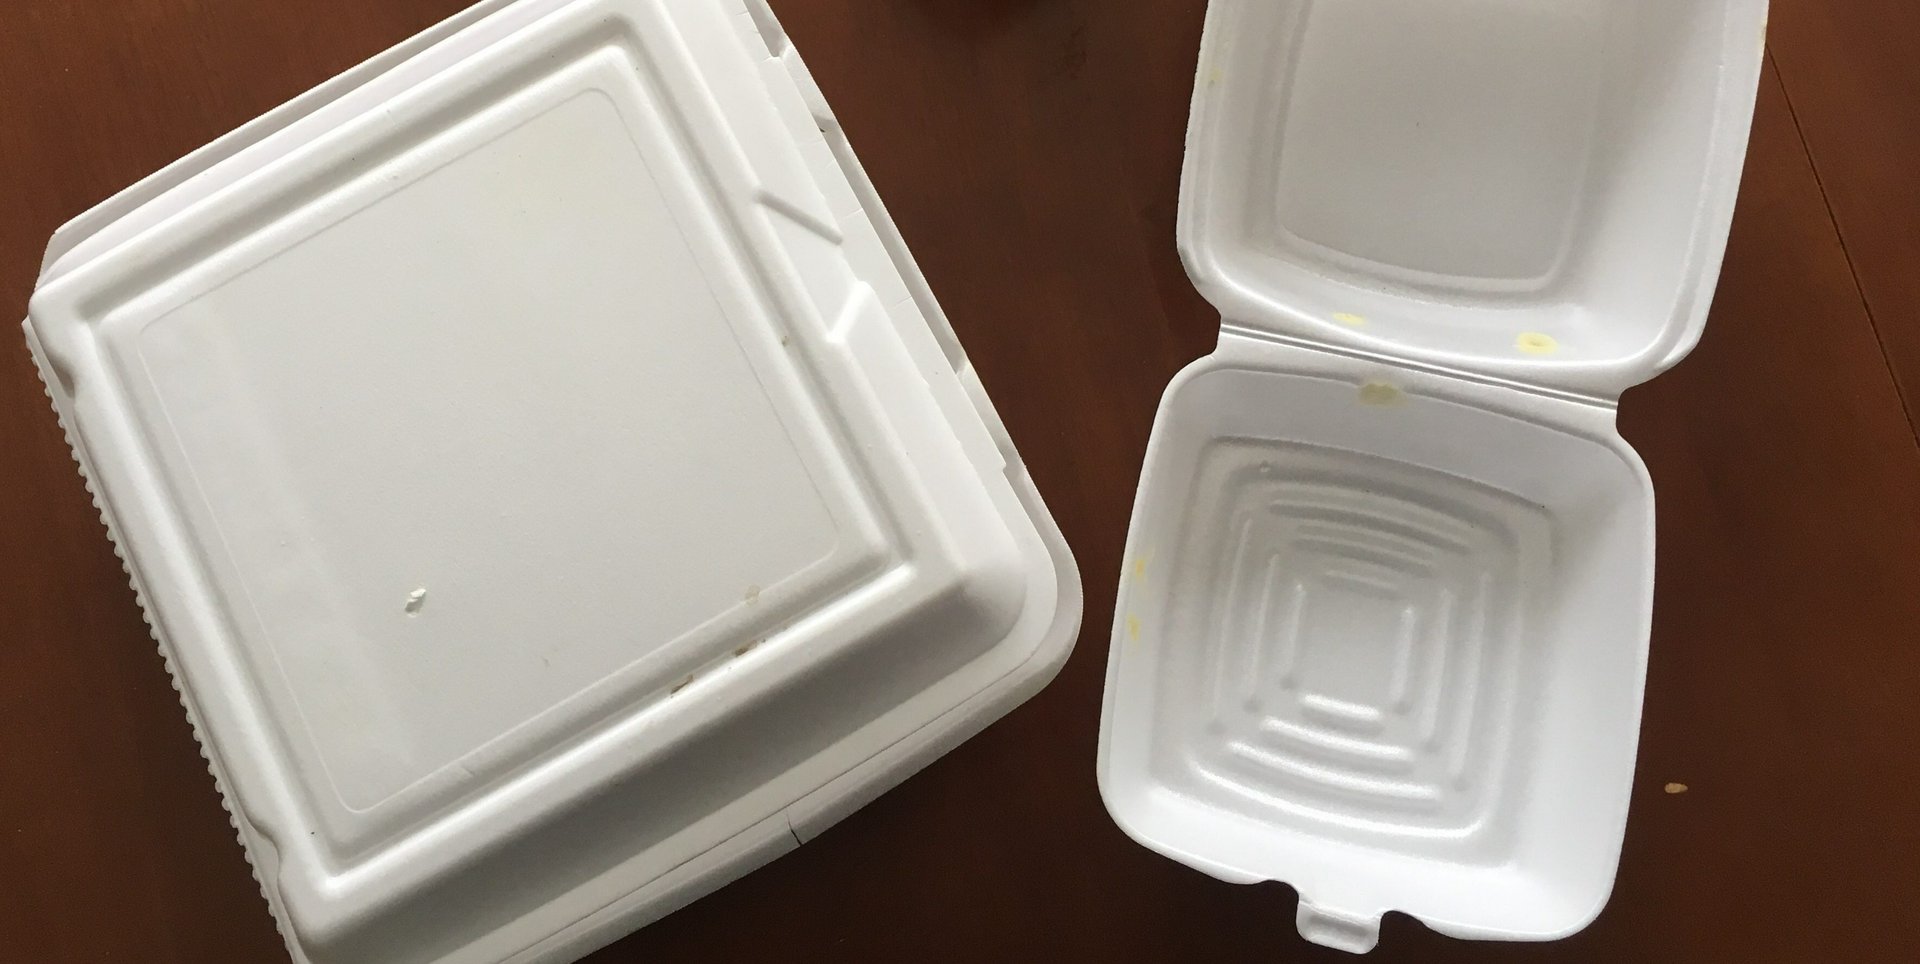 The real cost of Styrofoam shows more than meets the eye.